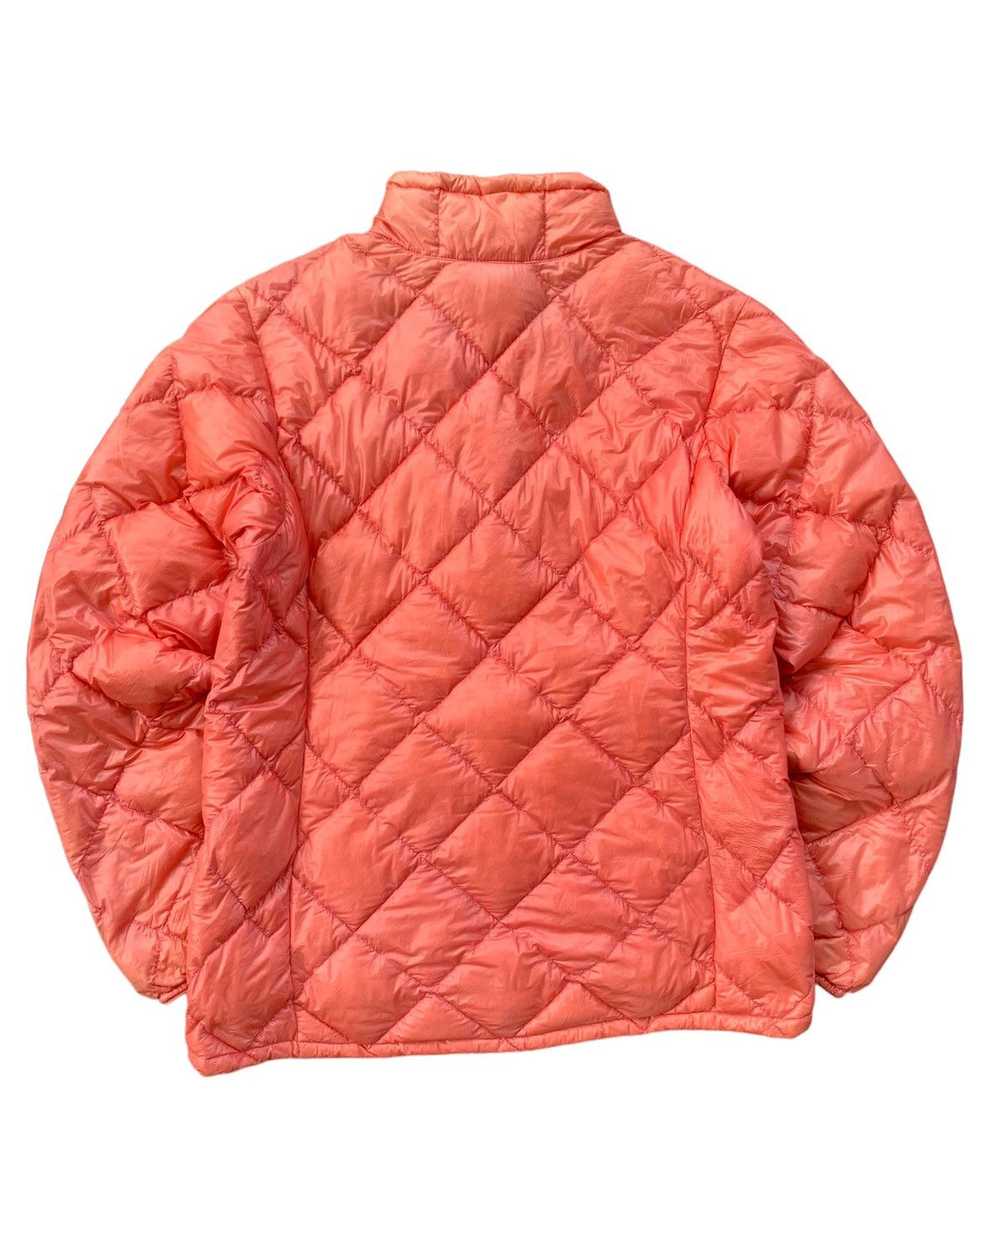 Montbell 2000s Diamond Lightweight Down Jacket - image 8